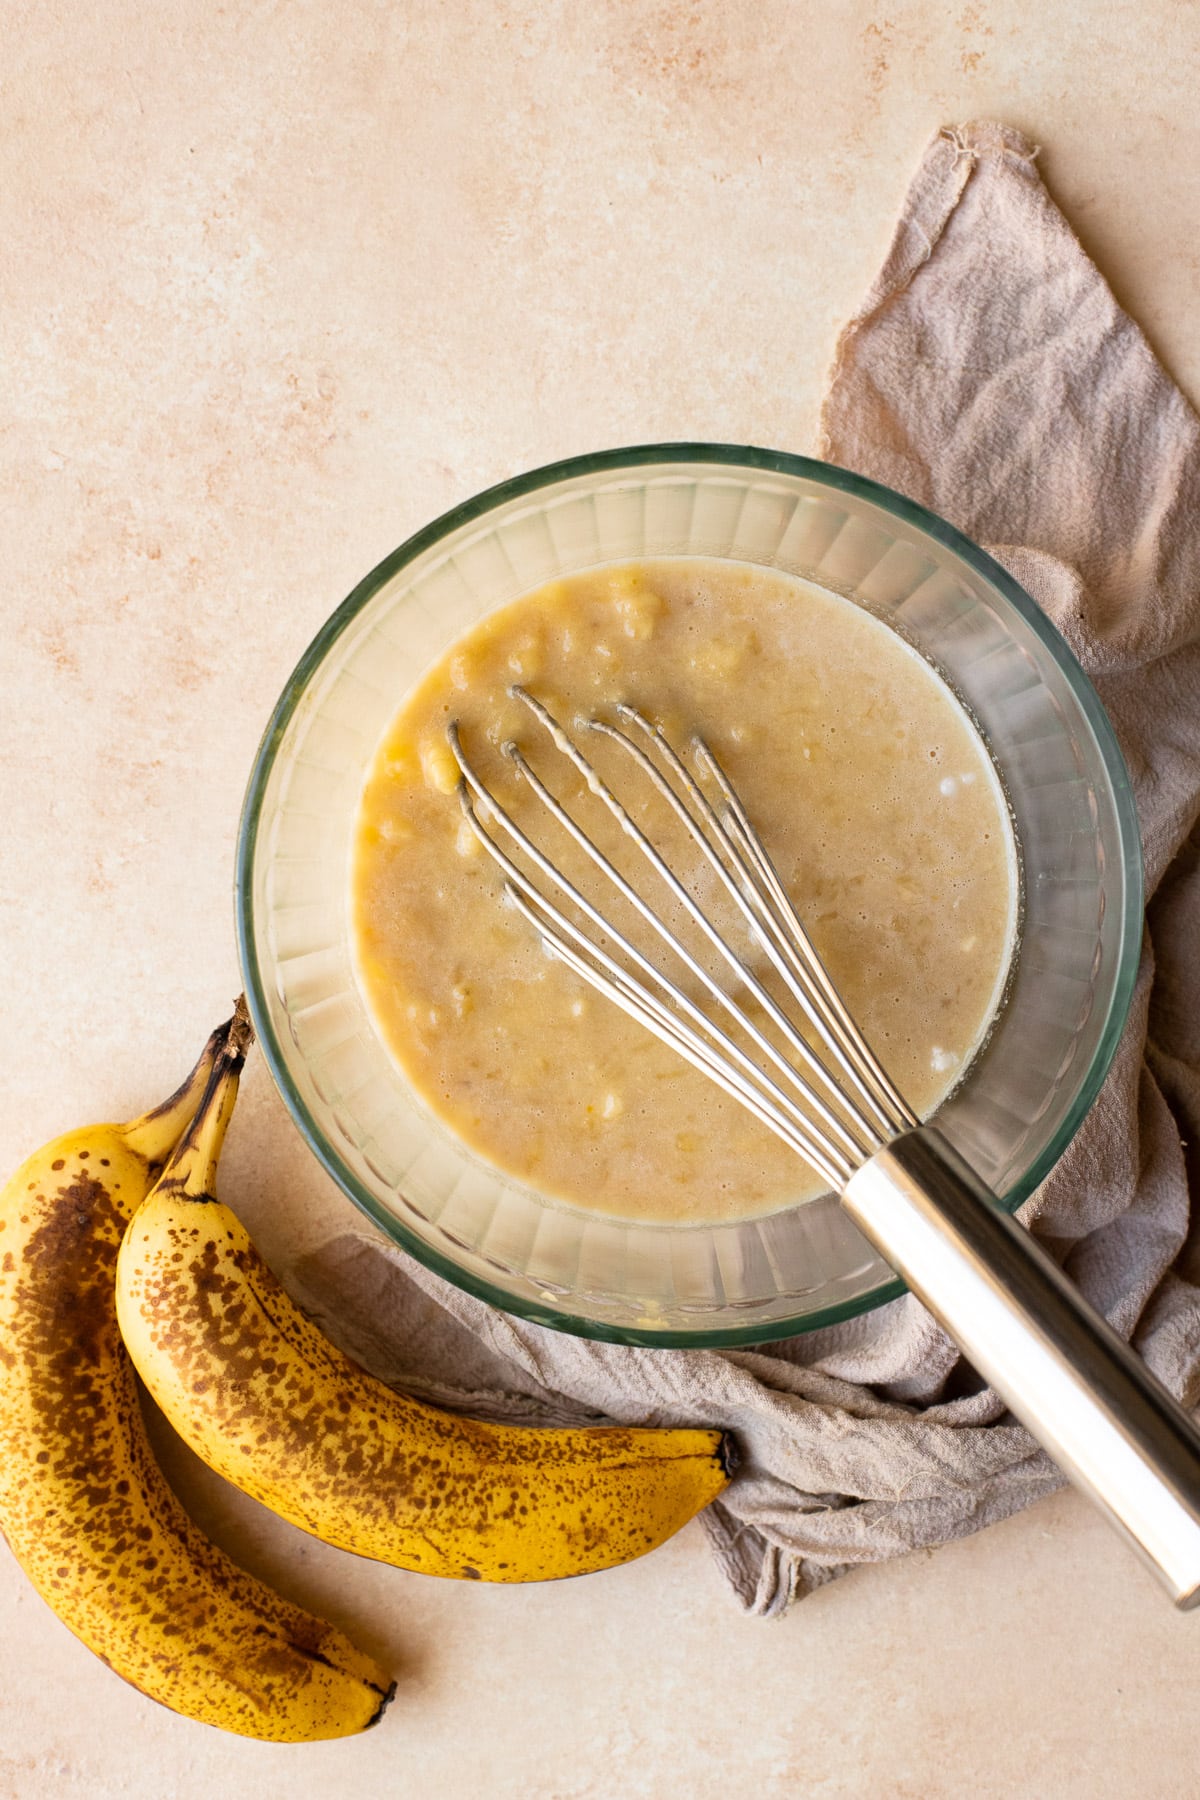 Mashed bananas, oat milk, and vanilla extract whisked together.